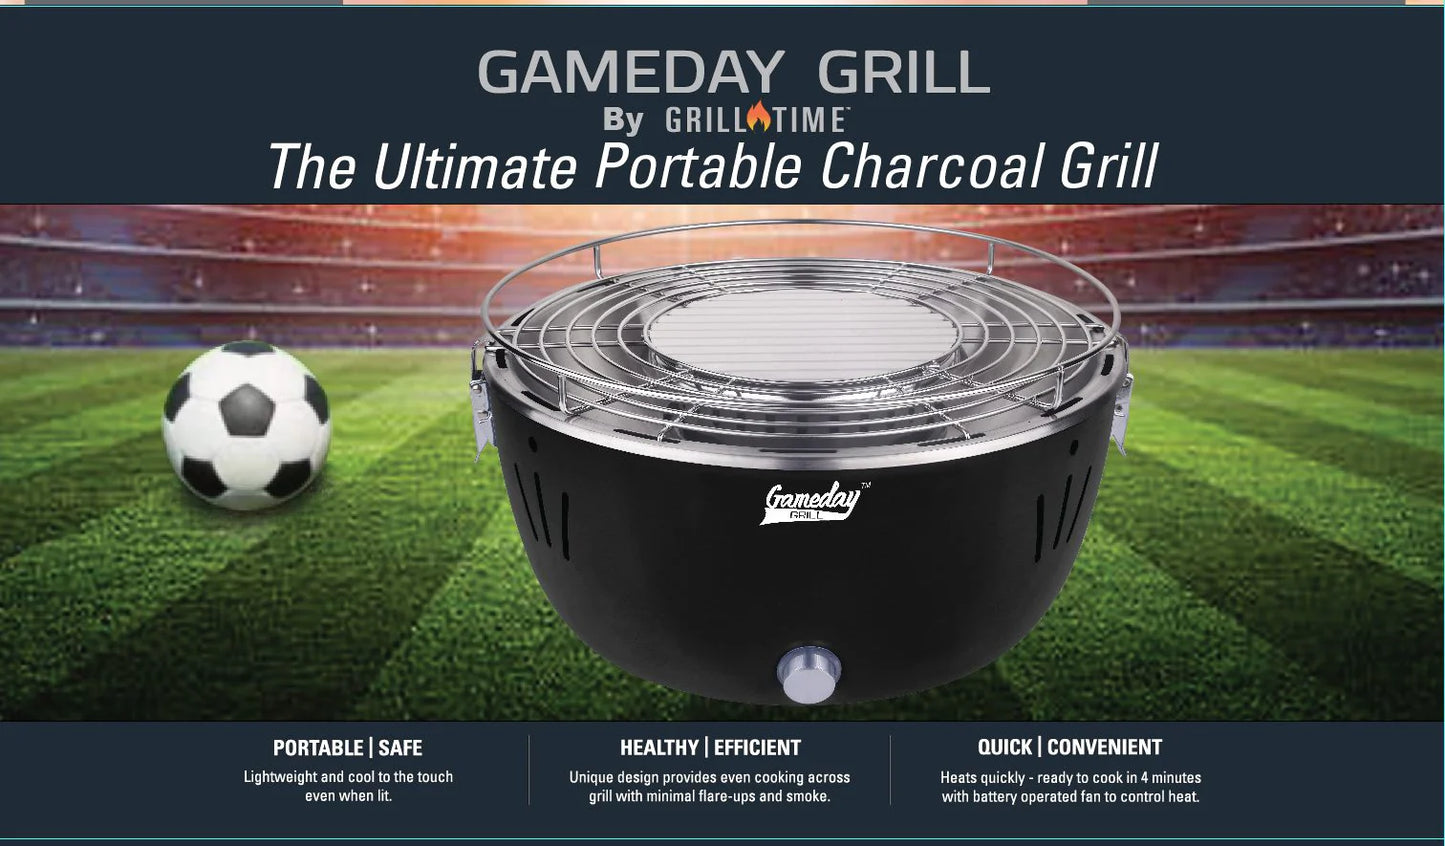 Grill Time Tailgater GTX Portable Charcoal Grill with Glass Hood Perfect for Camping Accessories